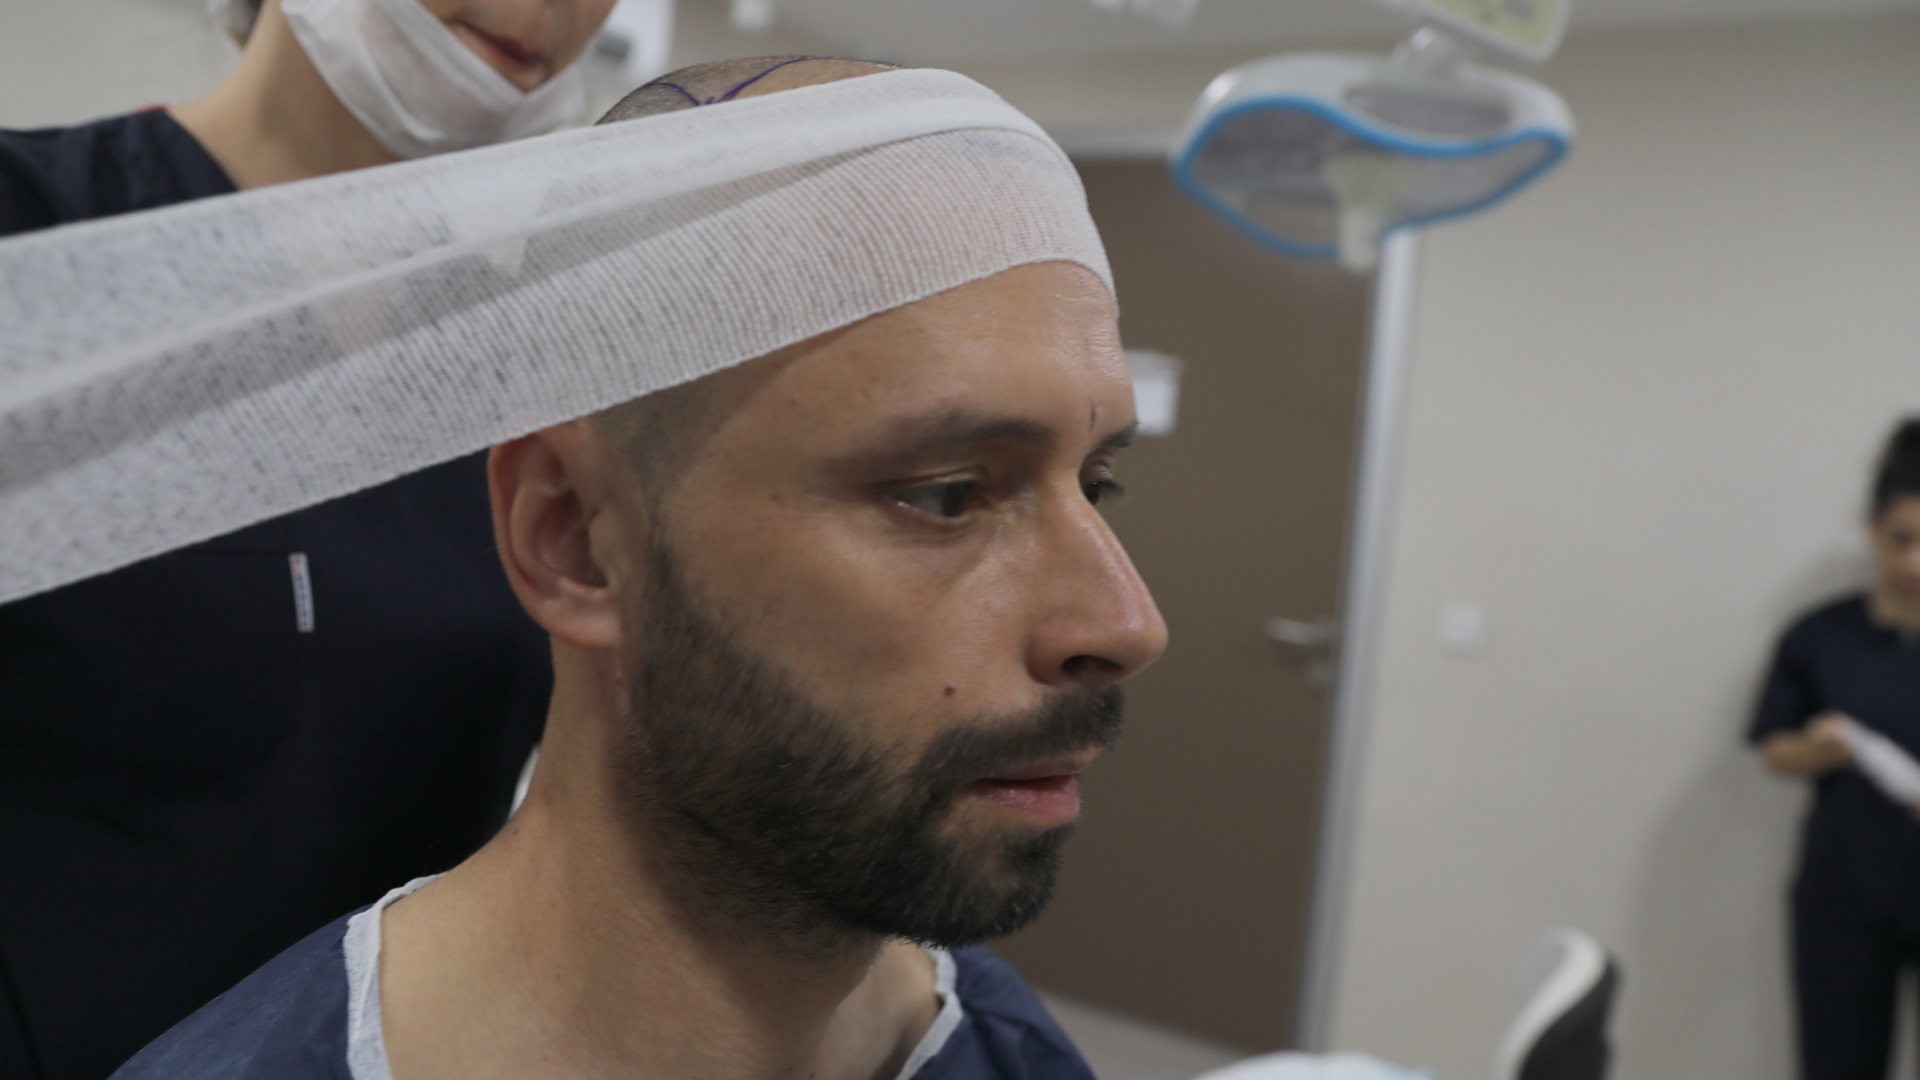 Man undergoes care after hair transplant